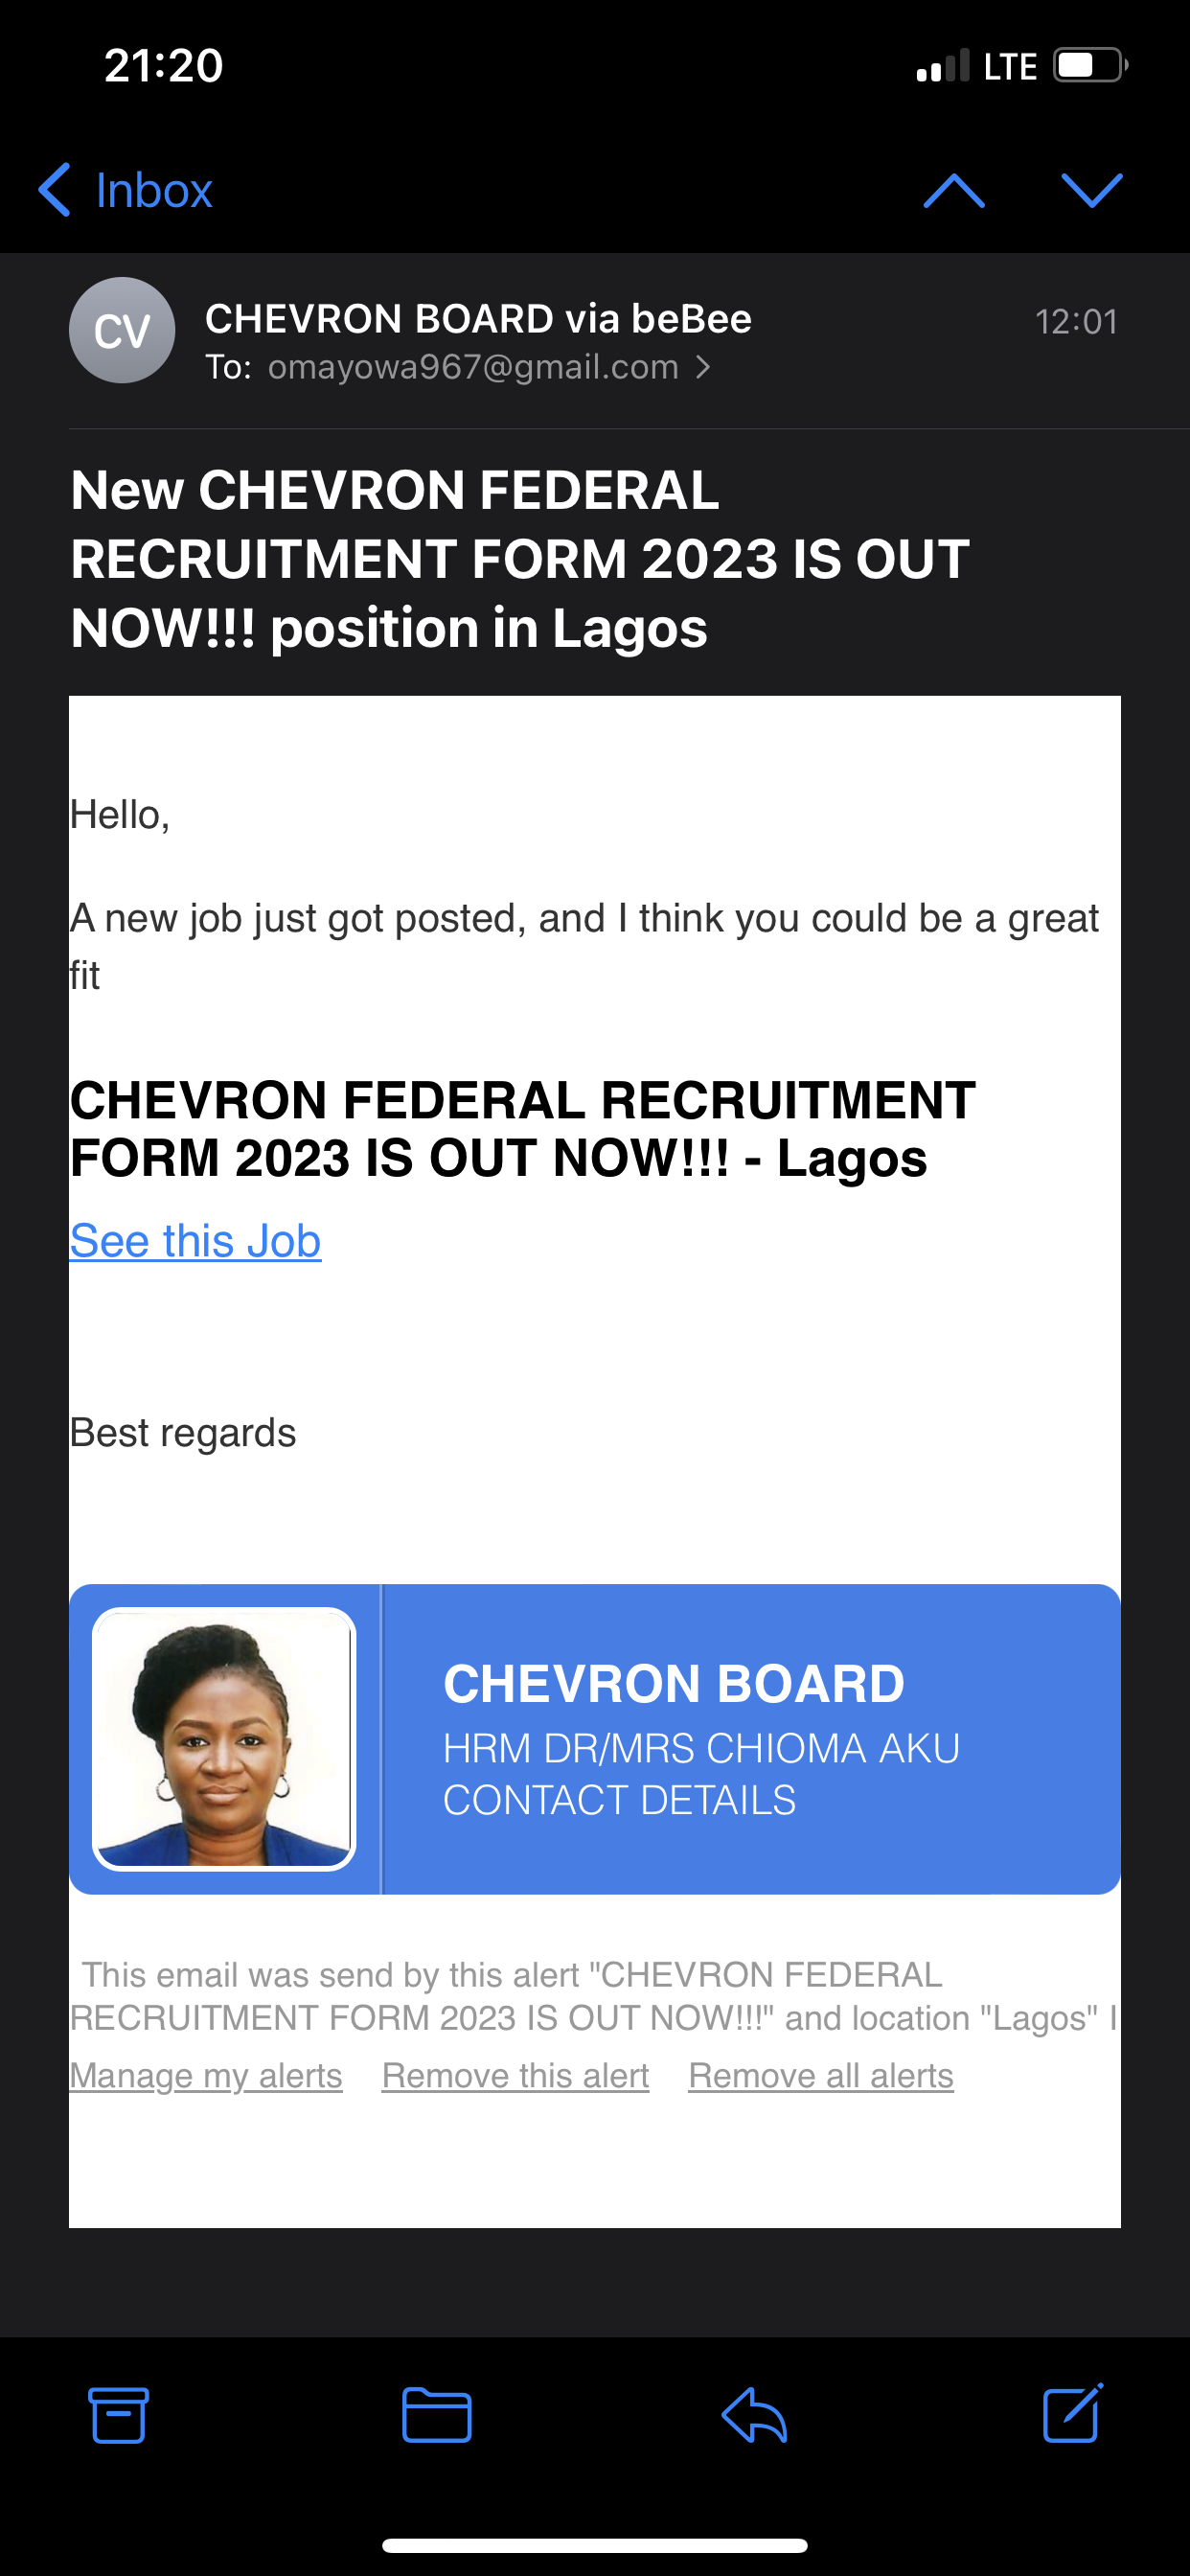 21:20 PIER

CHEVRON BOARD via beBee

To: omayowa967@gmail.com >

New CHEVRON FEDERAL
RECRUITMENT FORM 2023 IS OUT
NOW!!! position in Lagos

CHEVRON FEDERAL RECRUITMENT
FORM 2023 IS OUT NOW!!! - Lagos

See this Job

Best regards

CHEVRON BOARD

HRM DR/MRS CHIOMA AKU
CONTACT DETAILS

(A